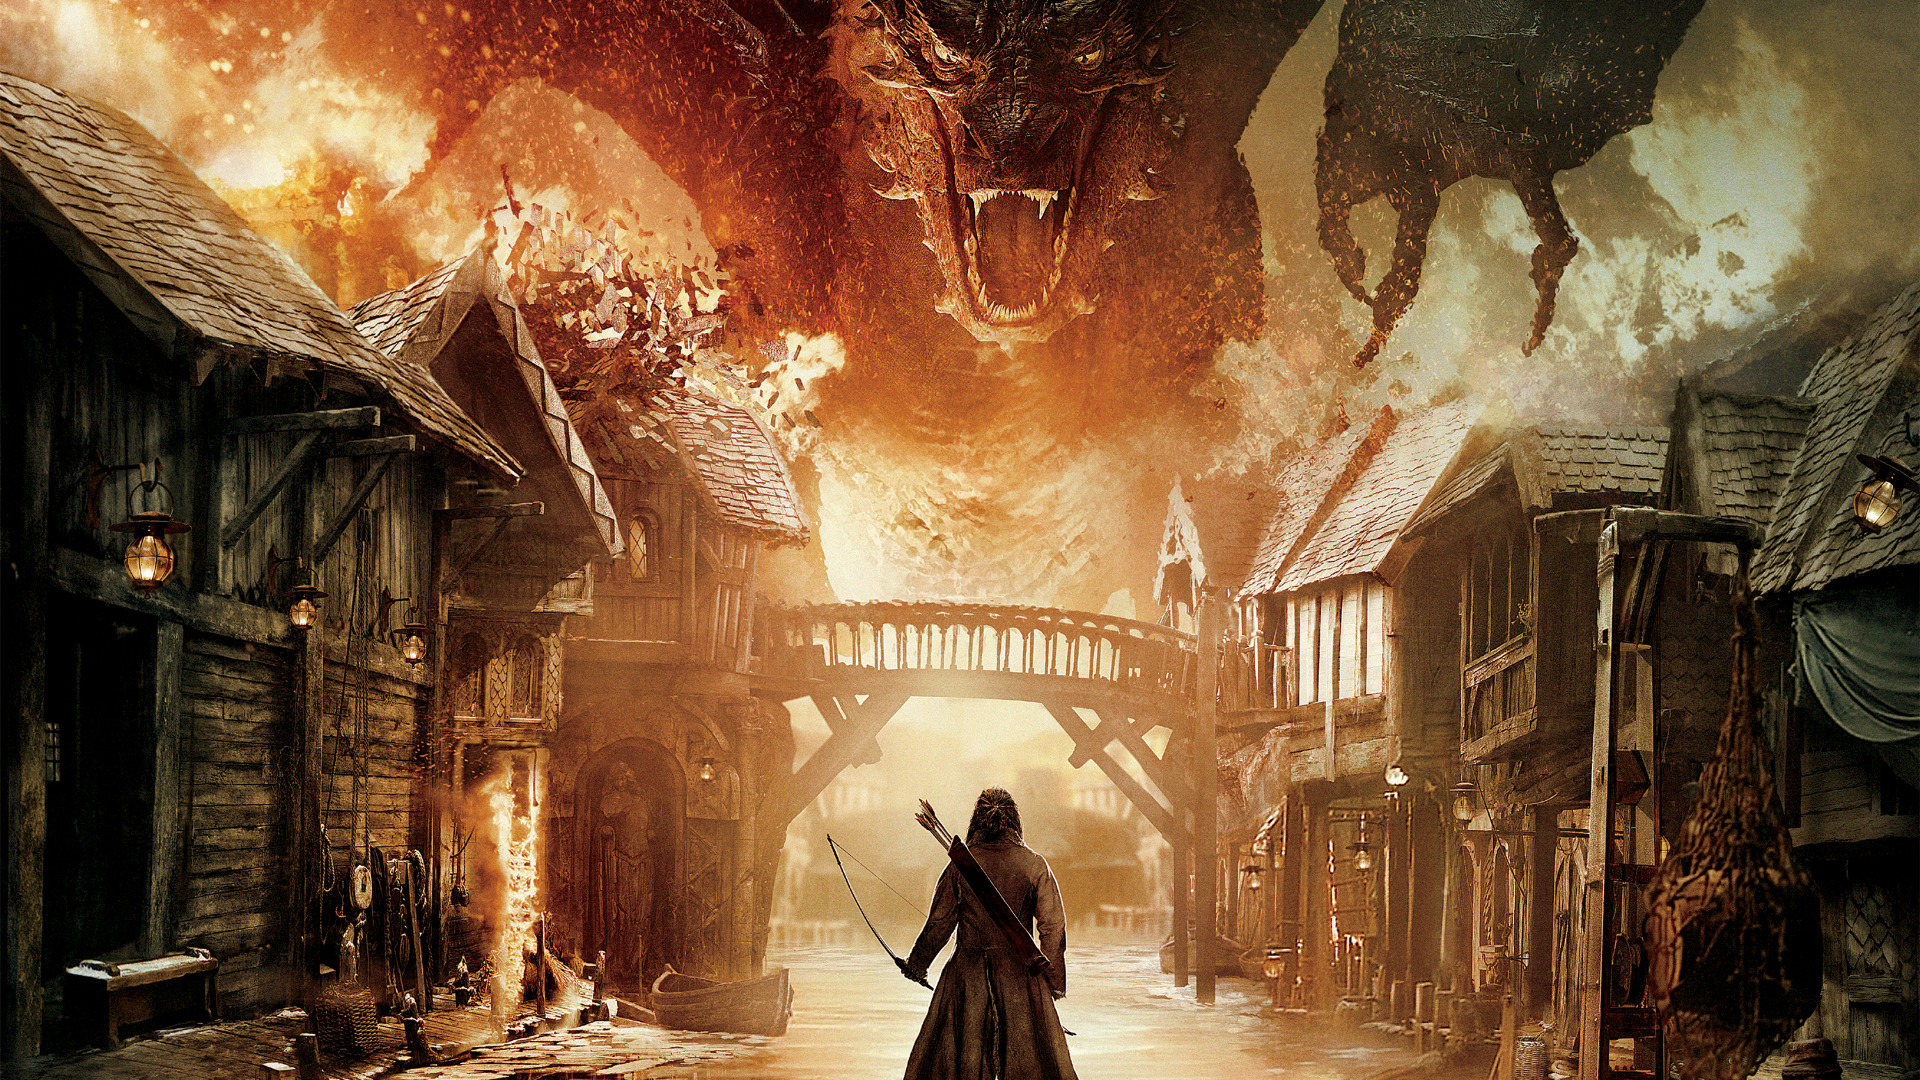 The Hobbit, The Lord Of The Rings, The Hobbit: The Battle Of The Five Armies Wallpaper